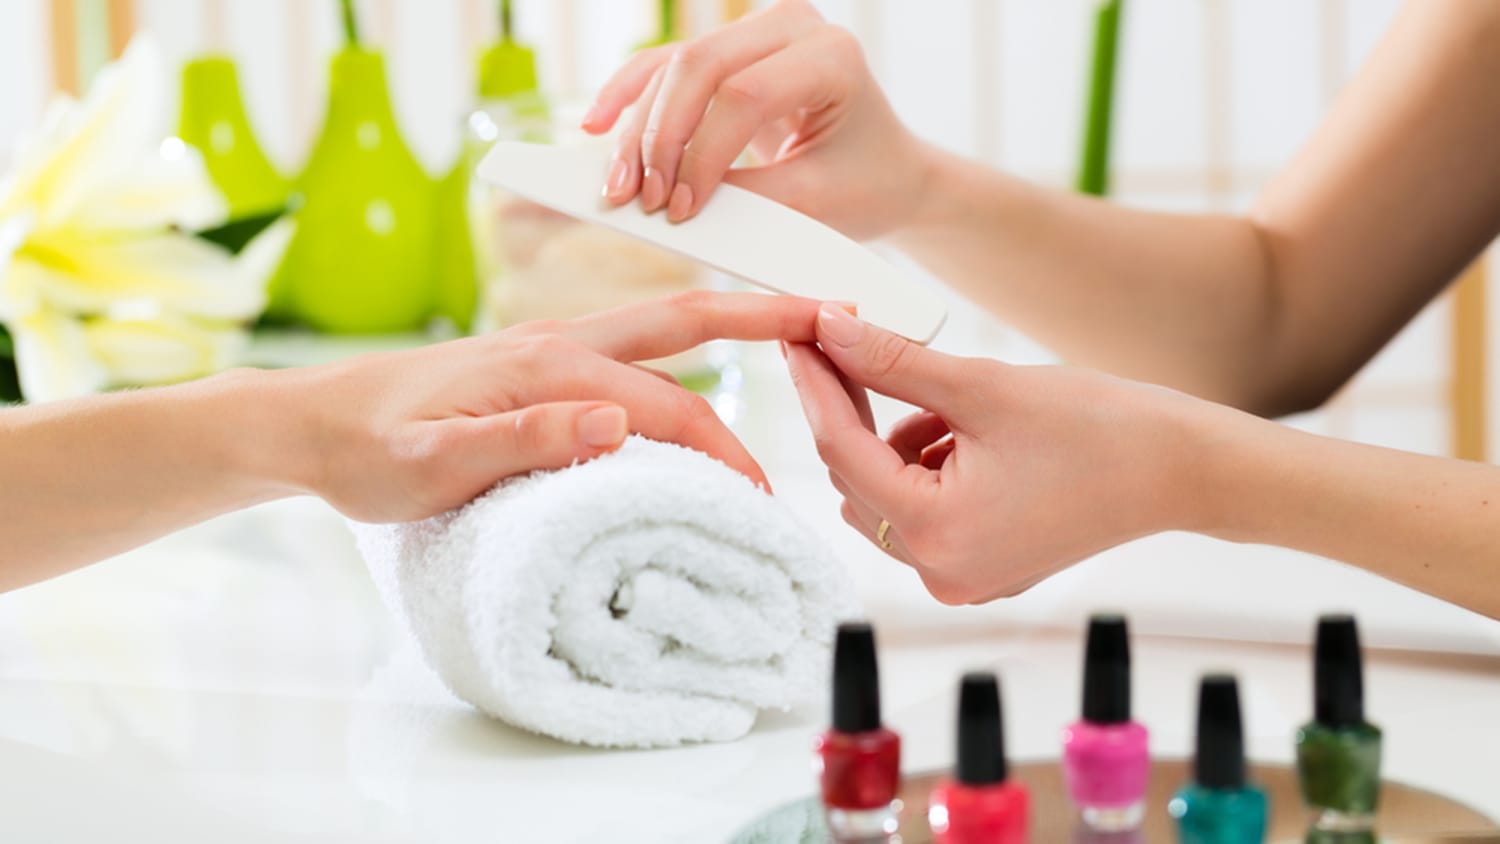 Nail salon etiquette How much should you tip?